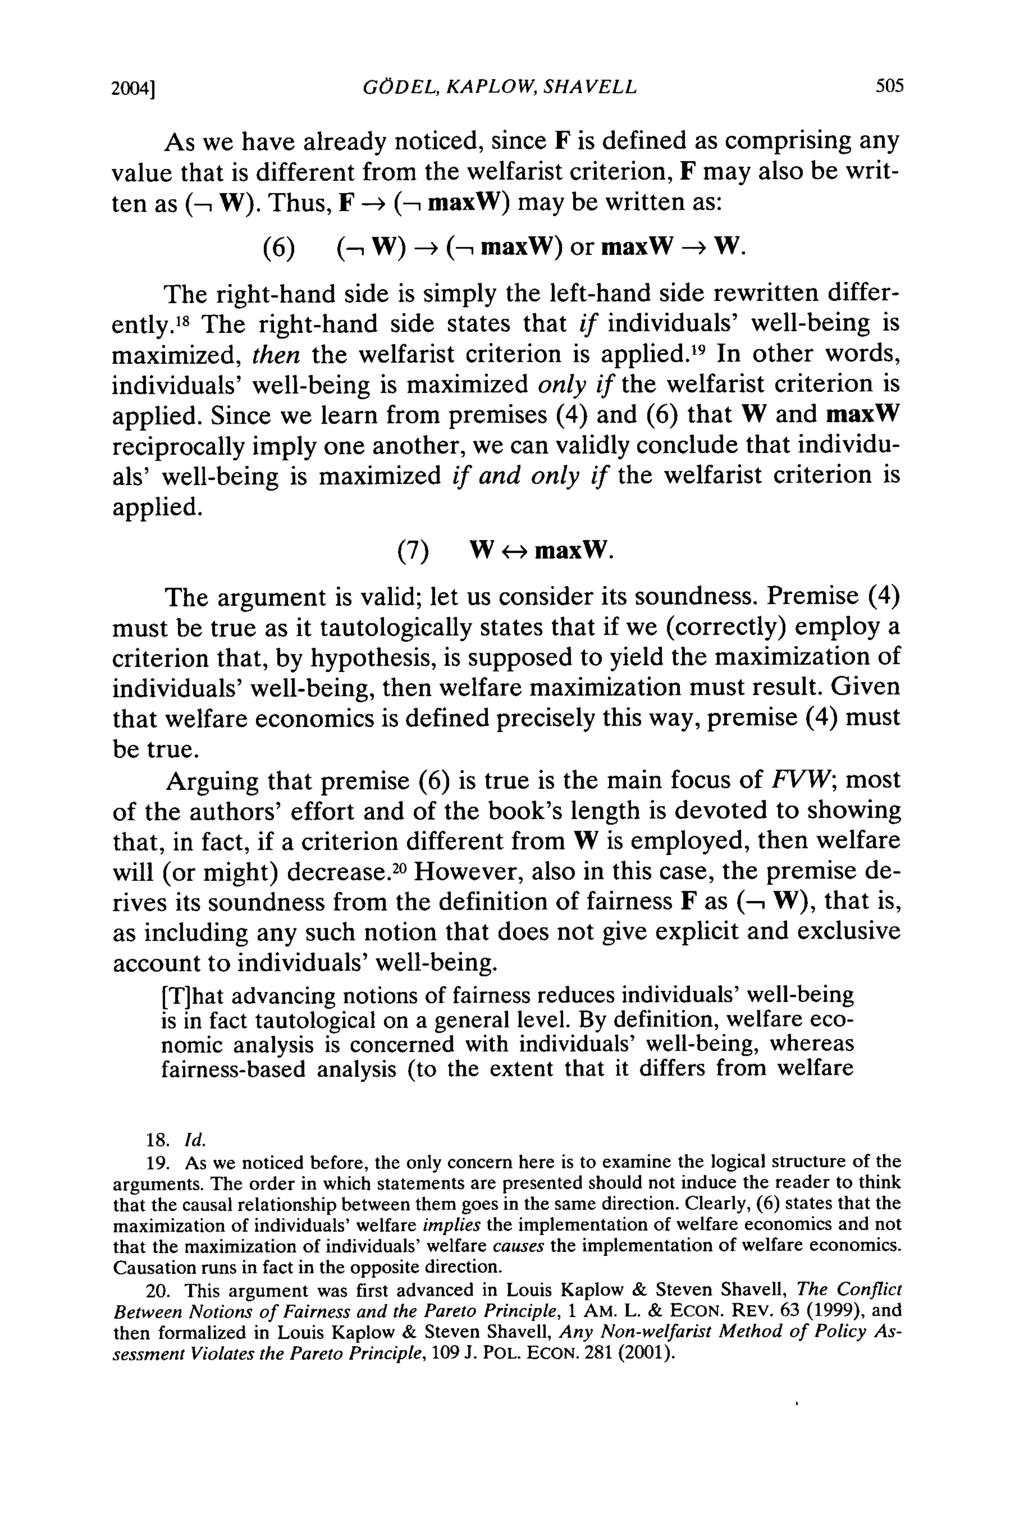 2004] GODEL, KAPLOW, SHAVELL As we have already noticed, since F is defined as comprising any value that is different from the welfarist criterion, F may also be written as (-, W).